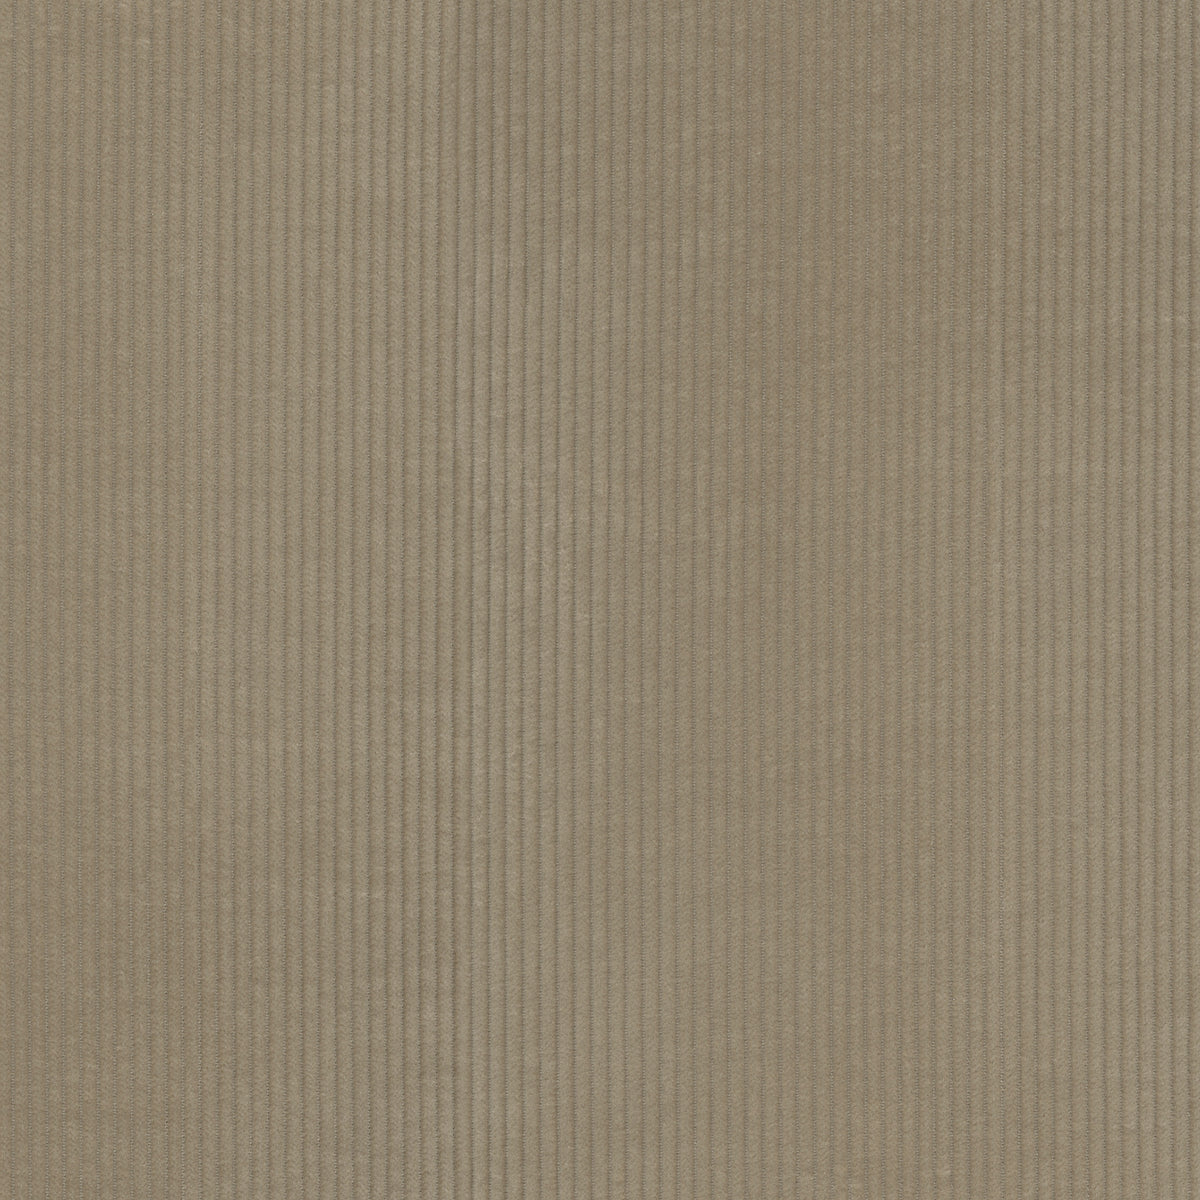 P/K Lifestyles Wales - Fawn 412046 Upholstery Fabric